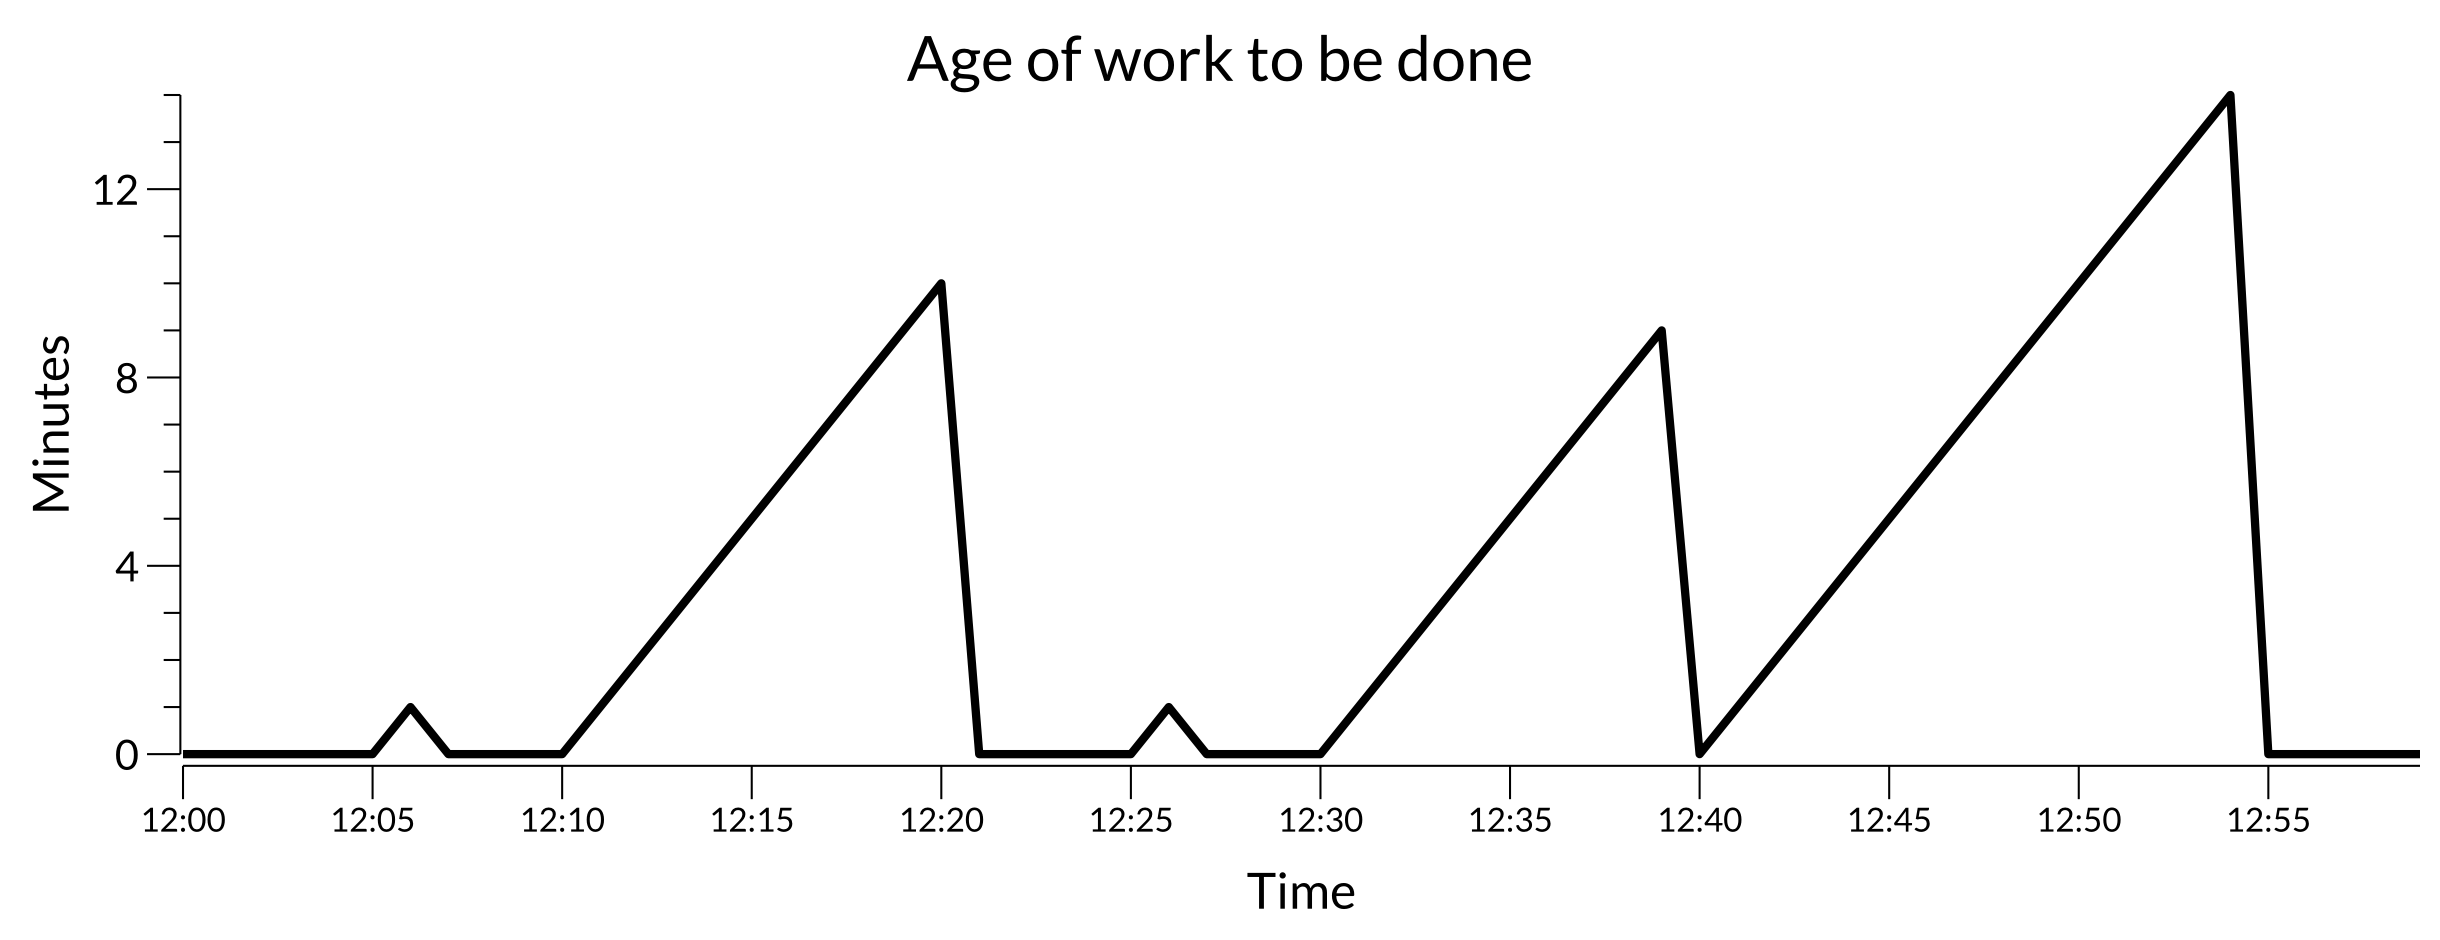 A sample time series line plot of age of work to be done showing outstanding work appearing, aging, and finishing, which makes the line have a more jagged sawtooth pattern.